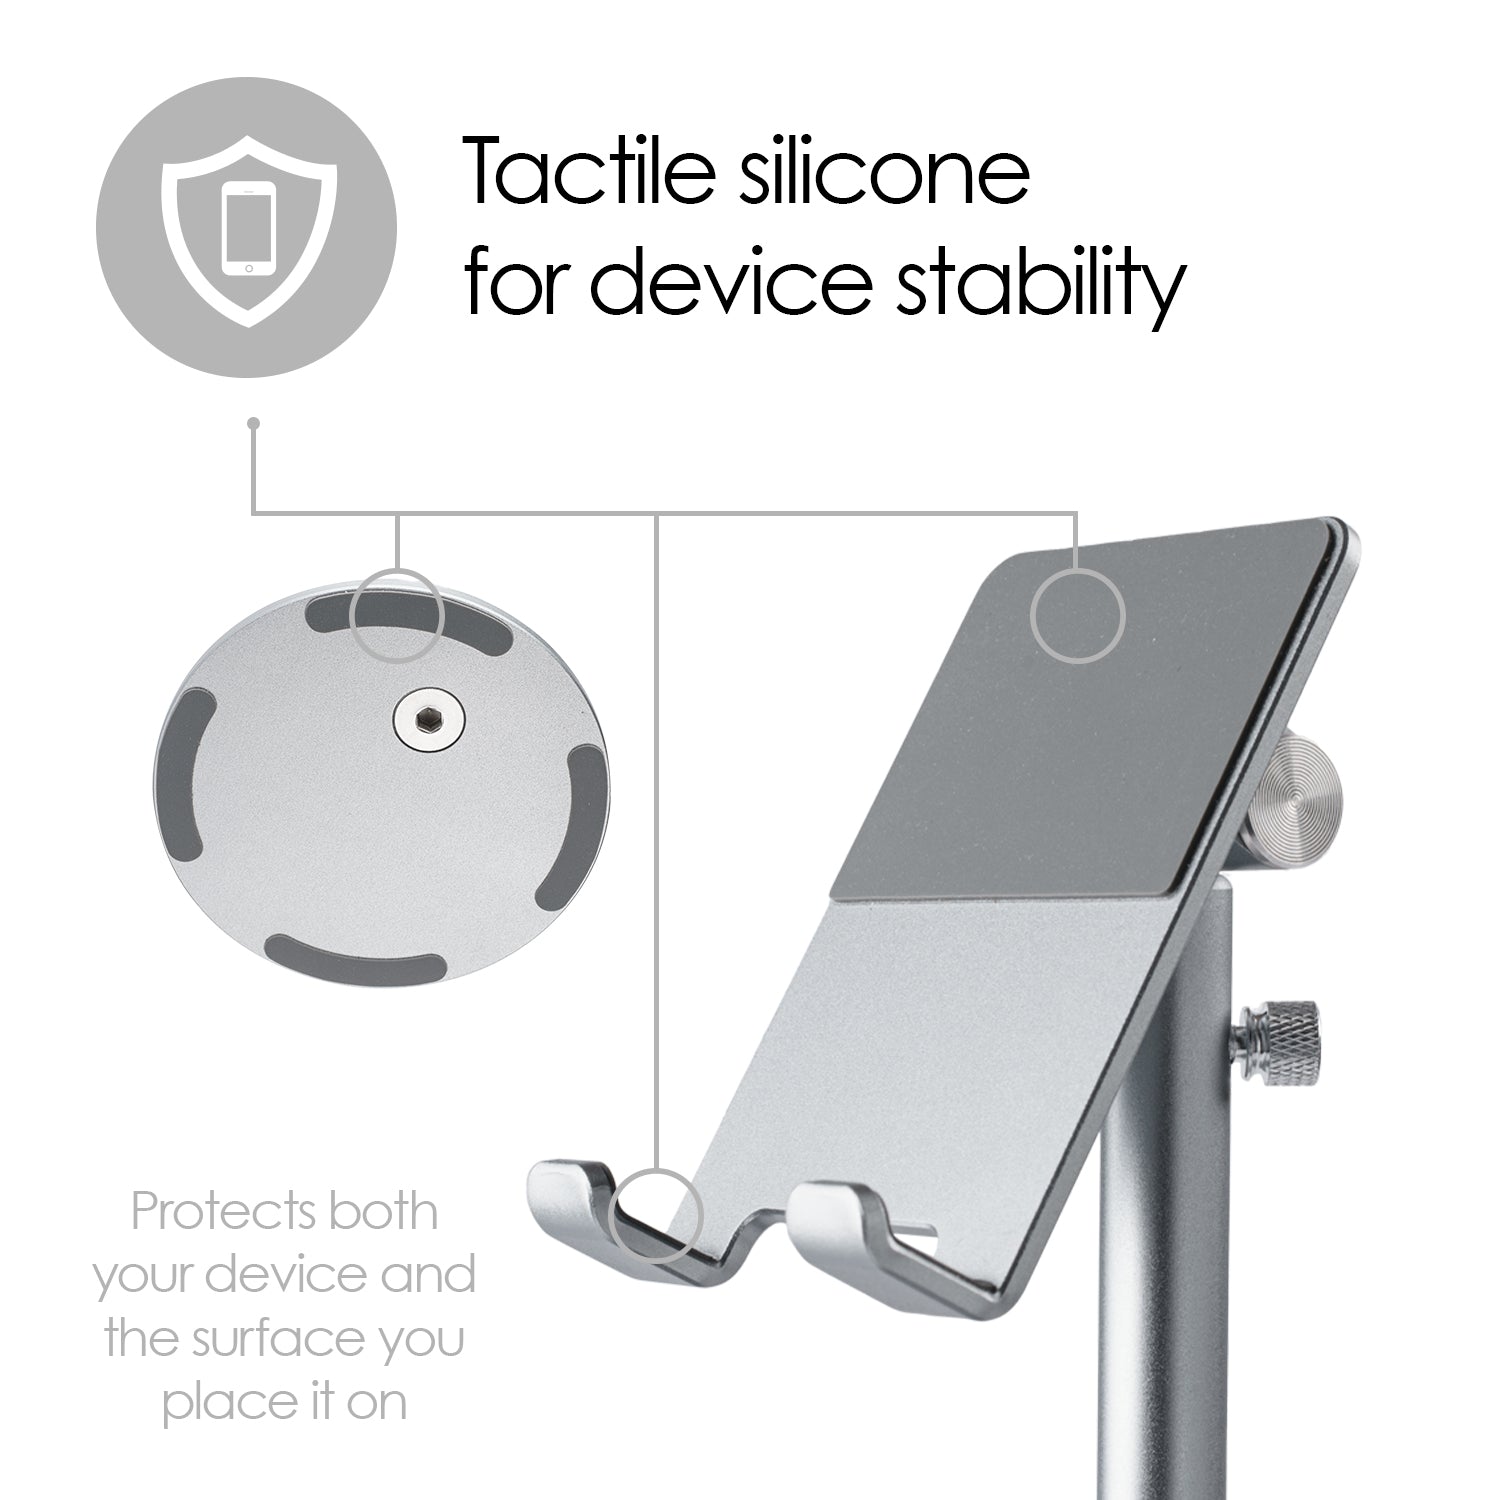 an aluminium metal smartphone and tablet stand  showing the tactile silicone pads that holds the device in place - text reads "tactile silicone for device stability"  and "protects both your device and the surface you put it on" 